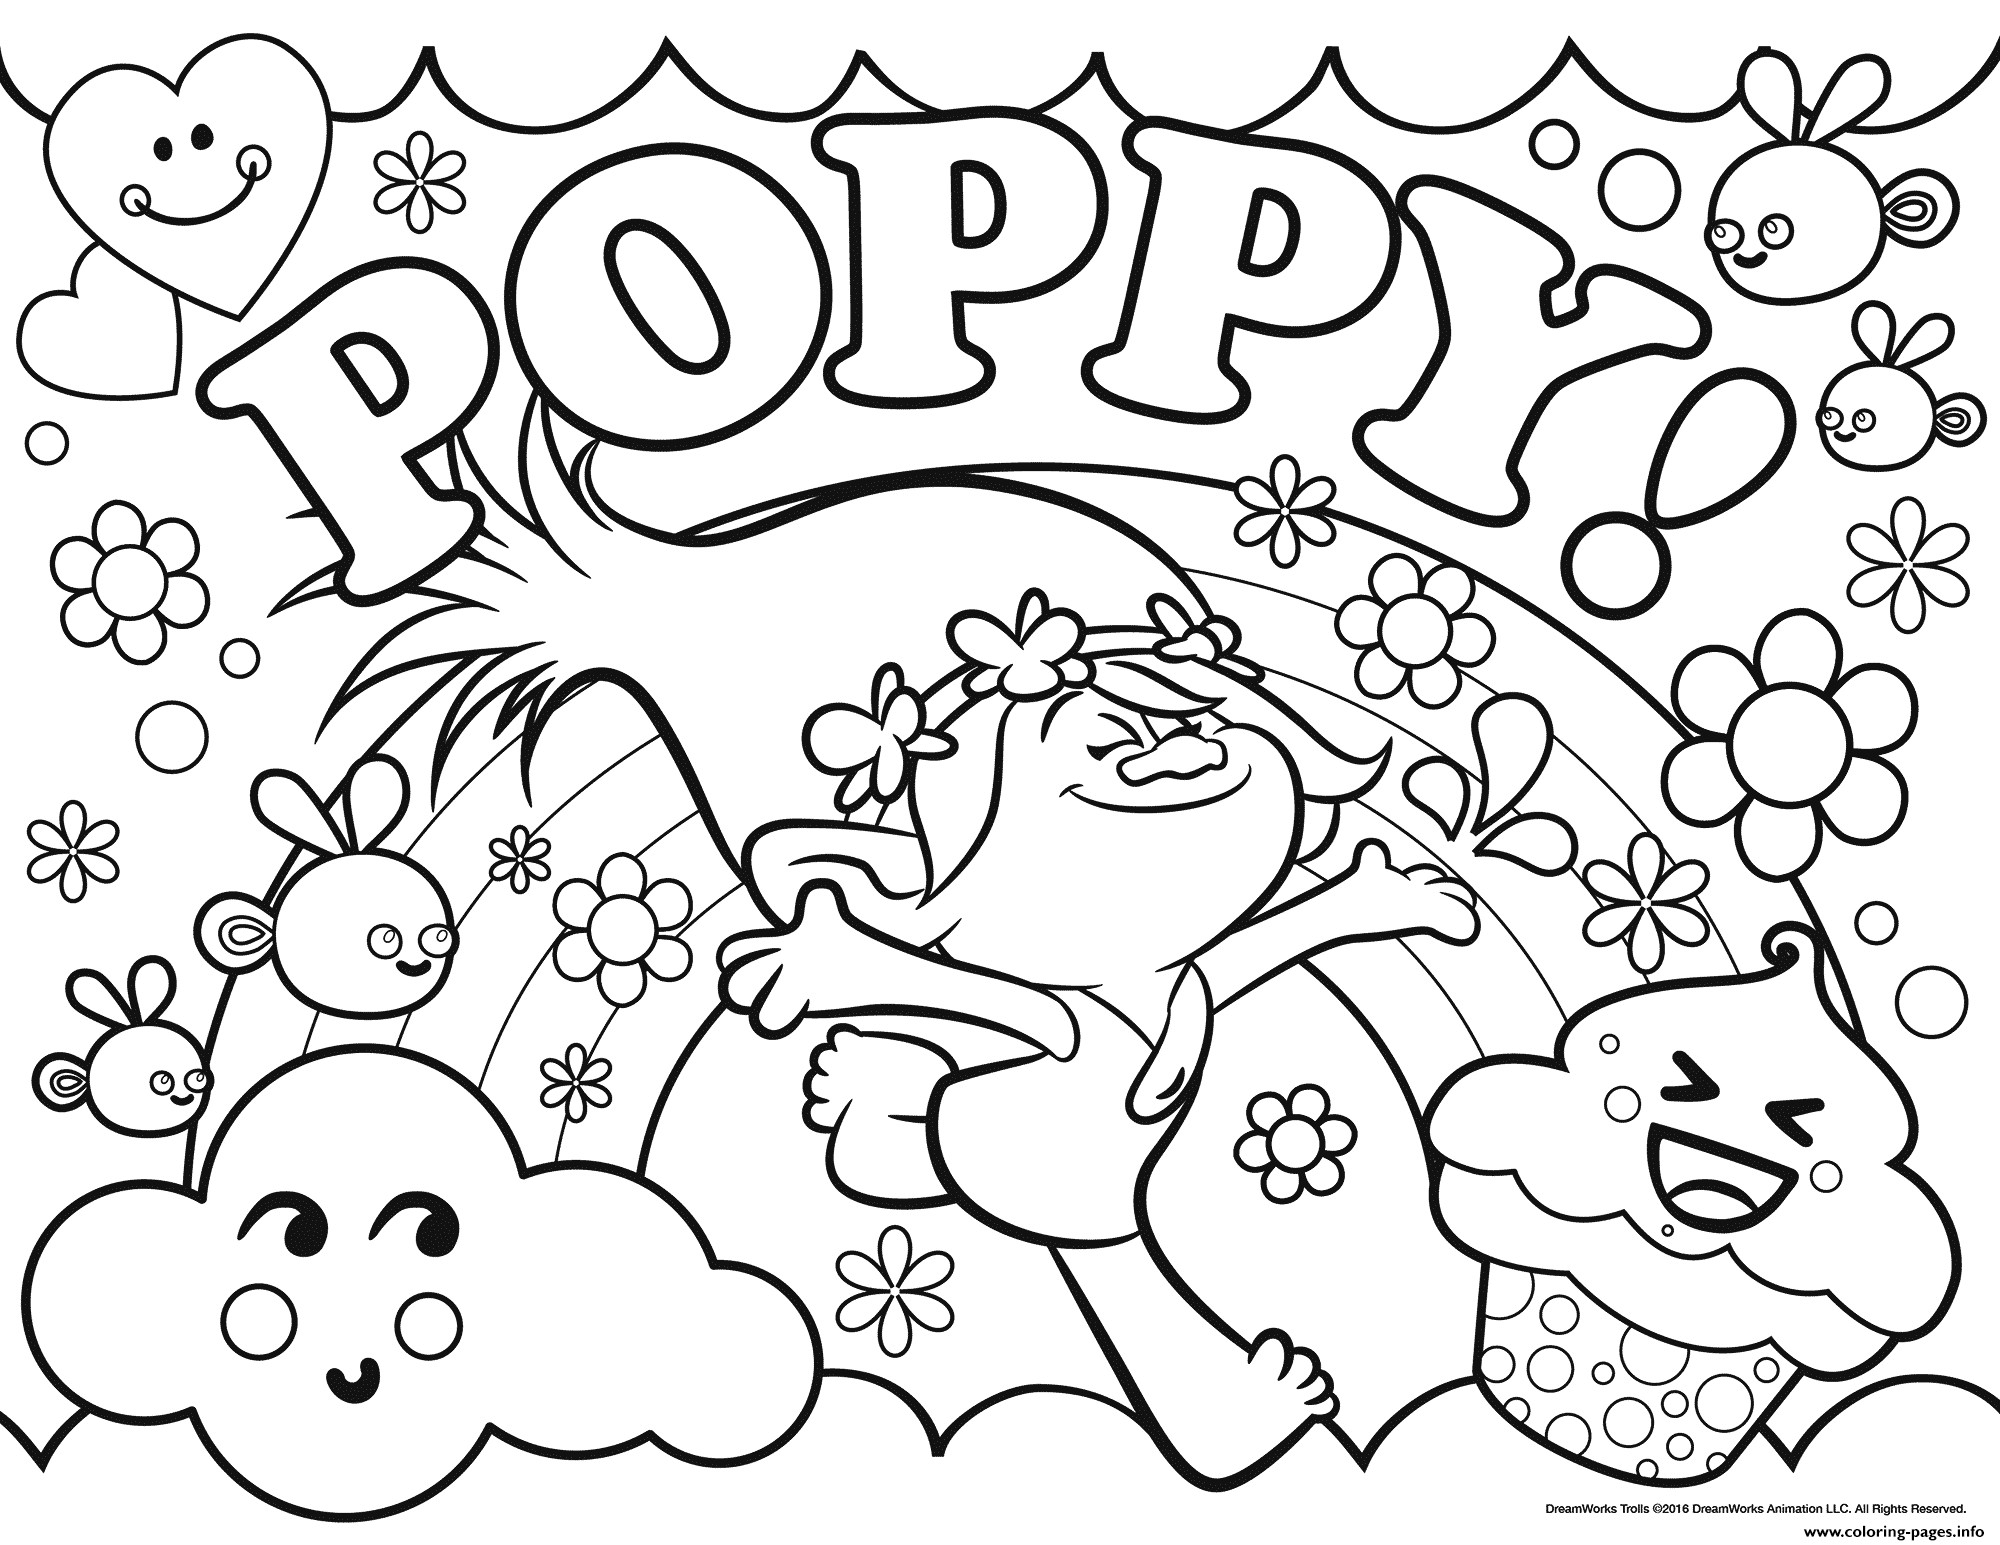 Trolls Poppy Coloring Pages Pdf Wallpaper